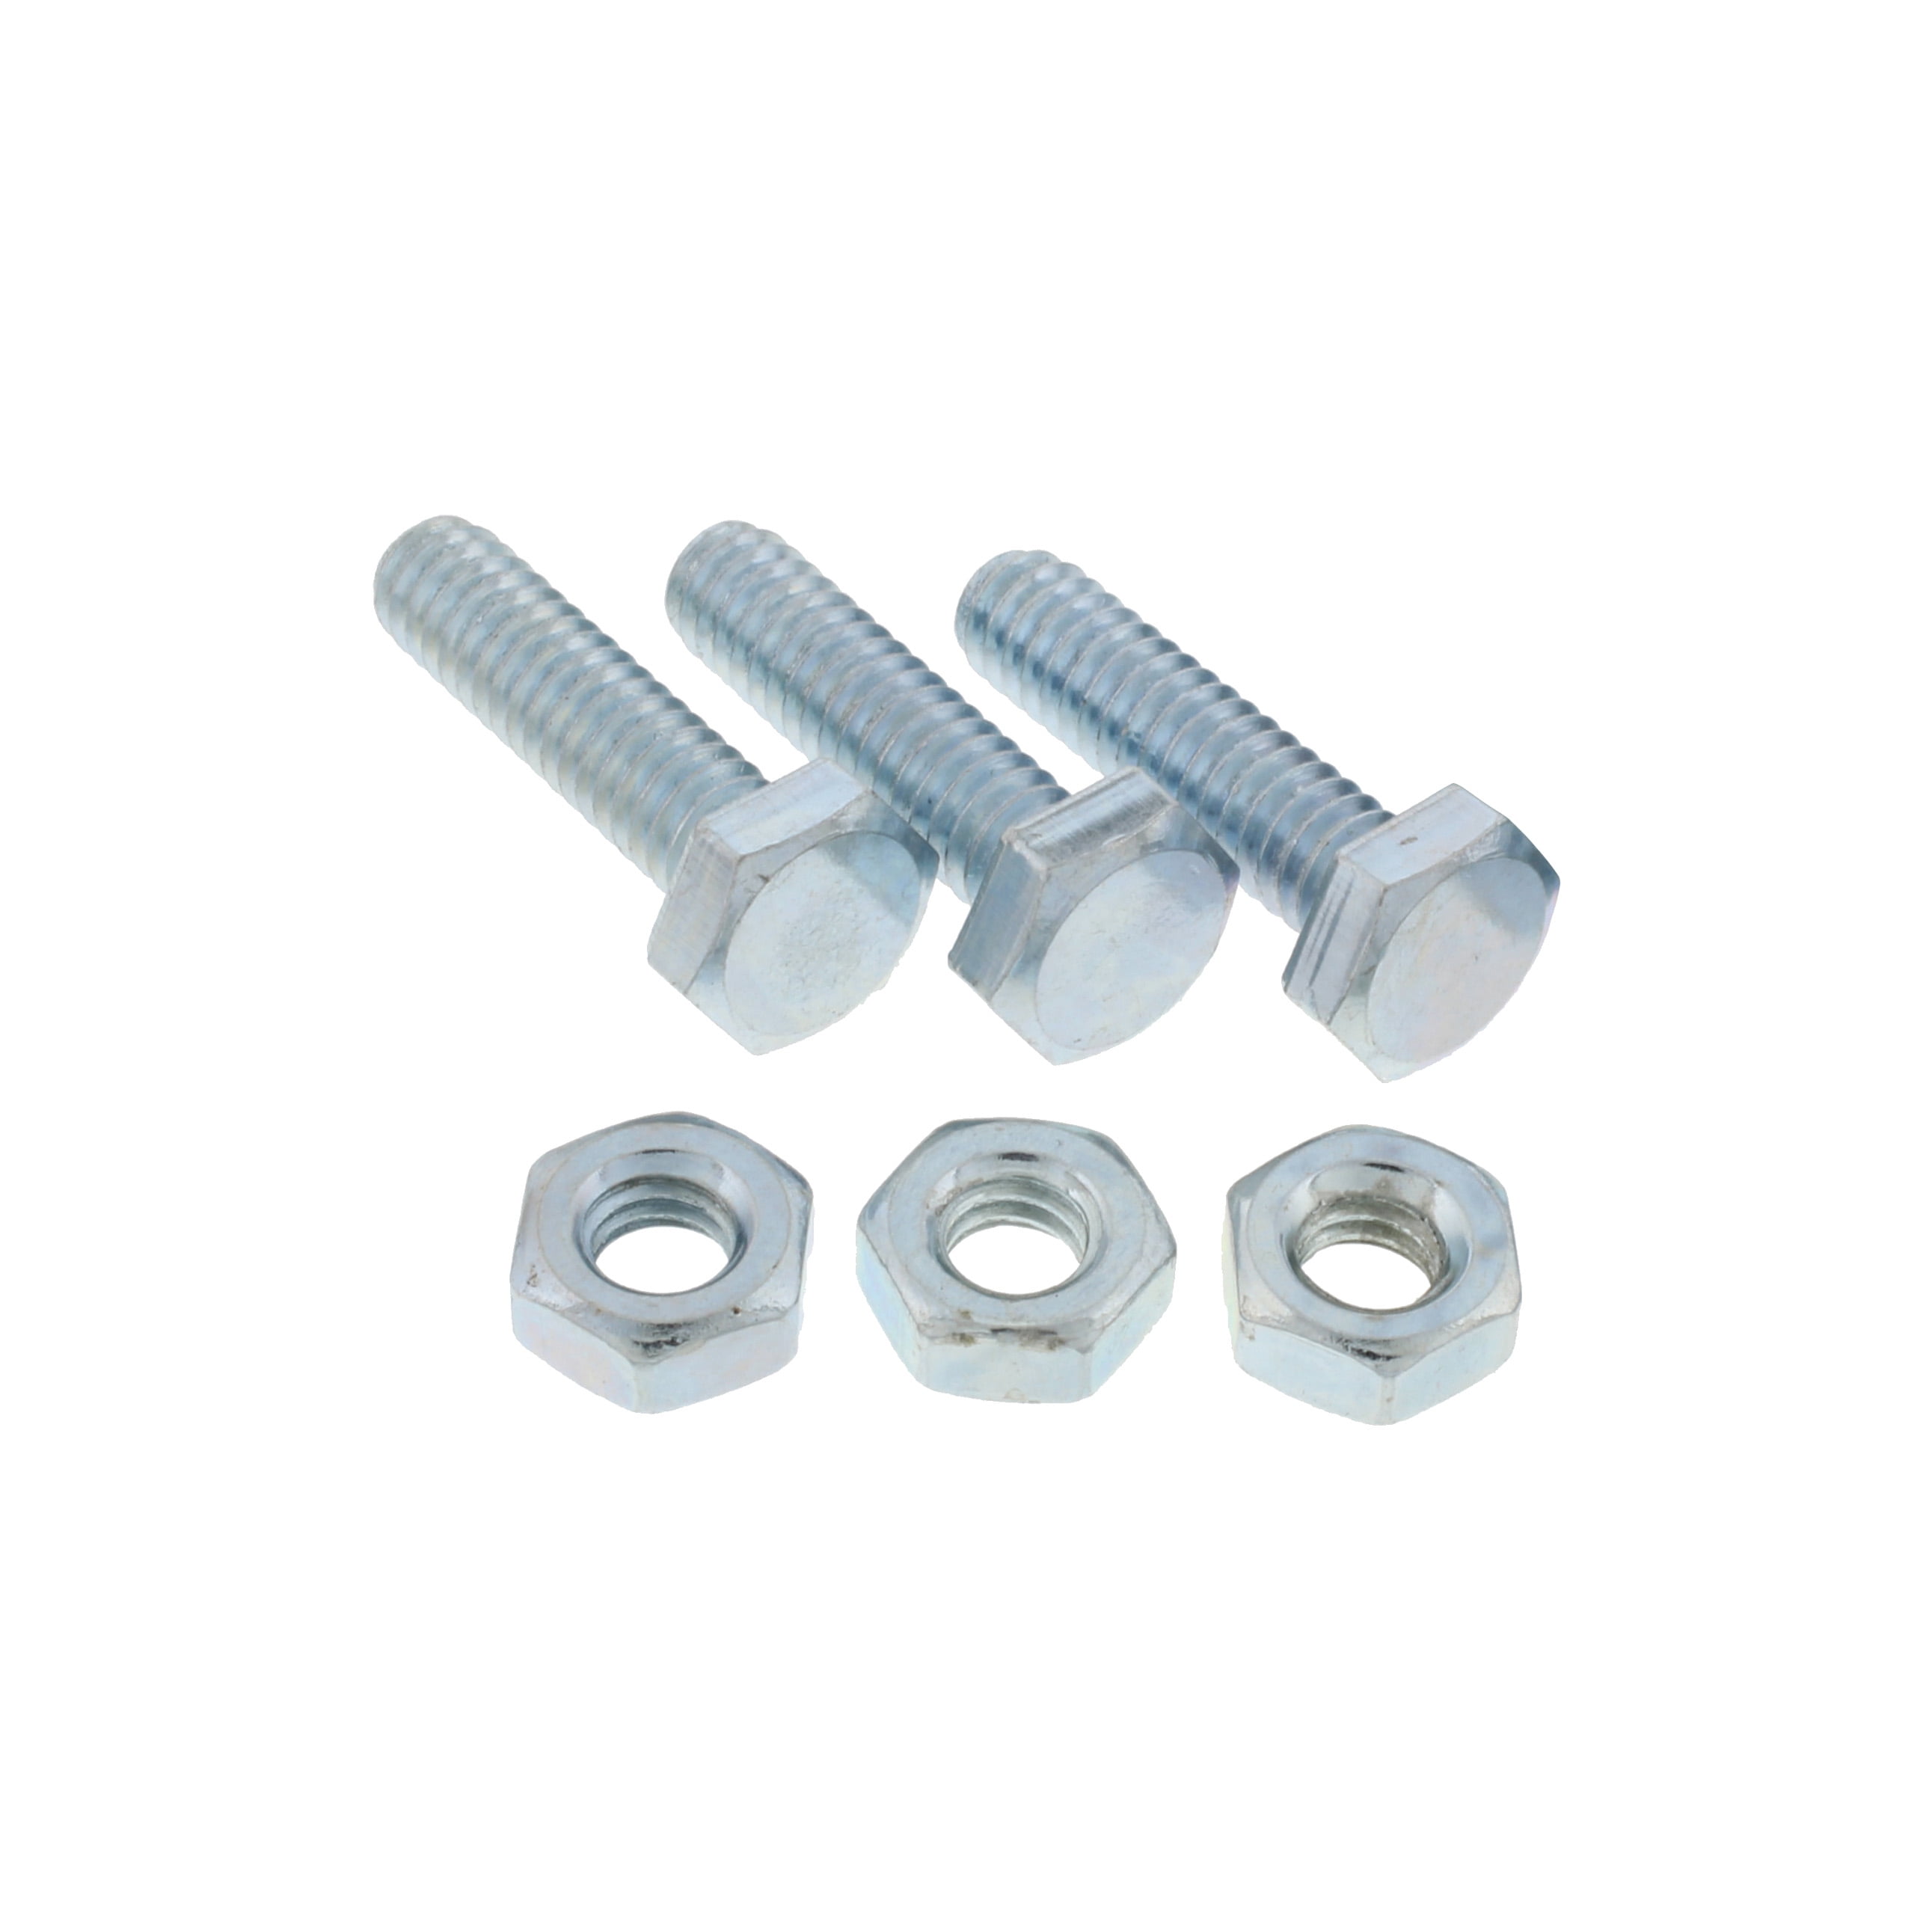 Zinc Plated Battery Hold Down Bolts x 9" long Pair 